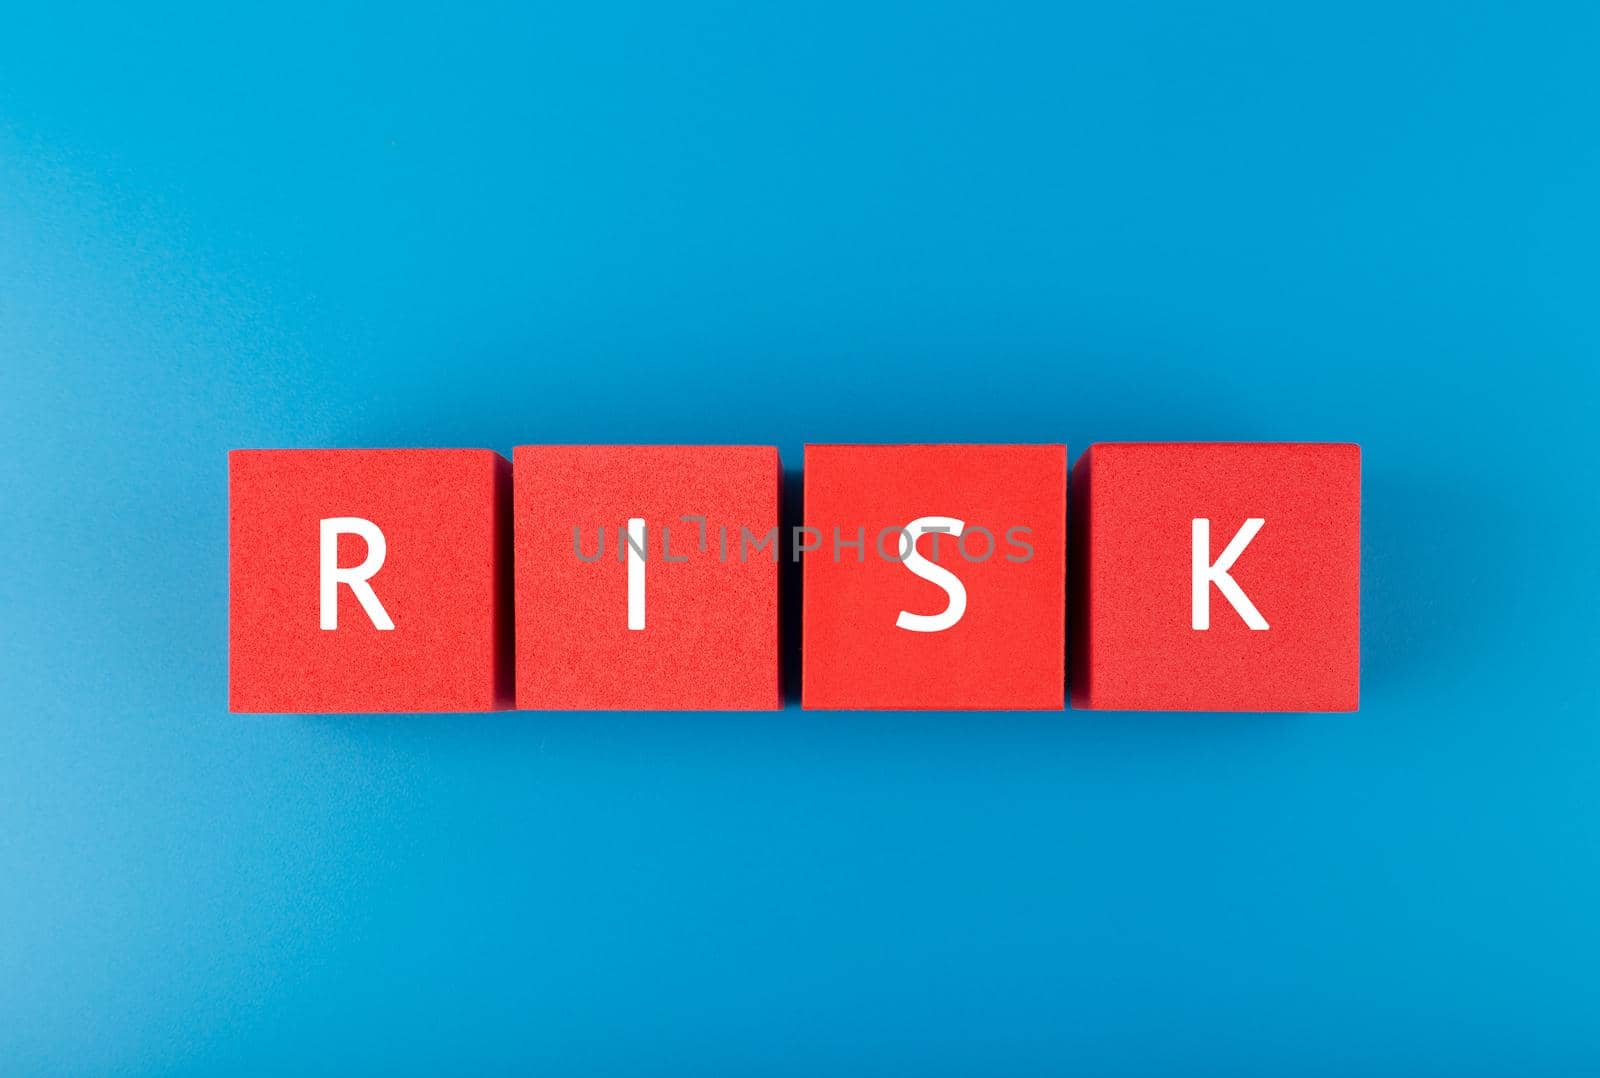 Risk single word written on red cubes against blue background. Concept of risk and danger in business, social life, decisions or strategy